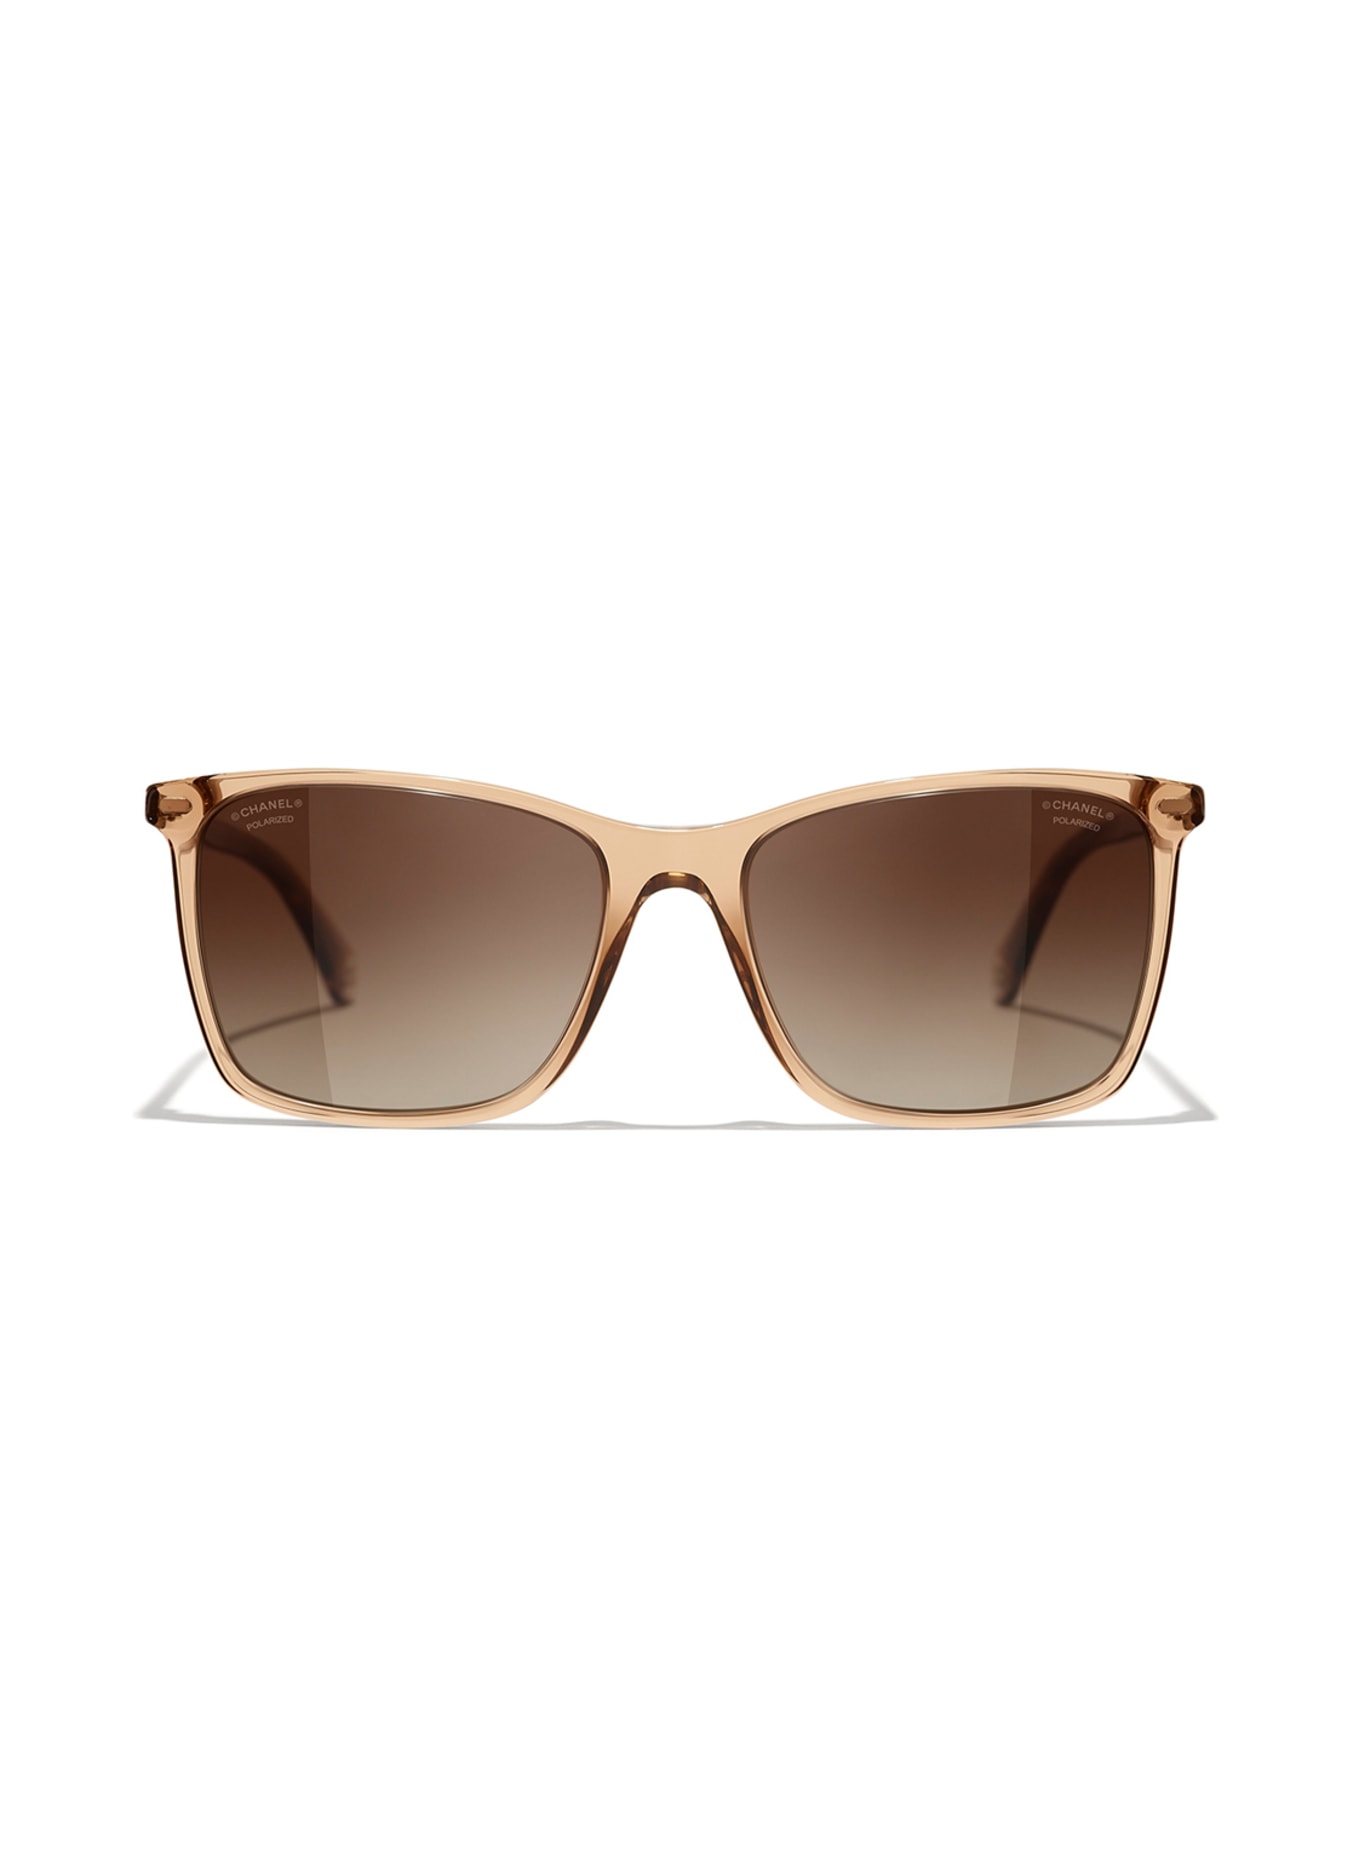 CHANEL Square sunglasses, Color: BROWN/BROWN GRADIENT (Image 2)